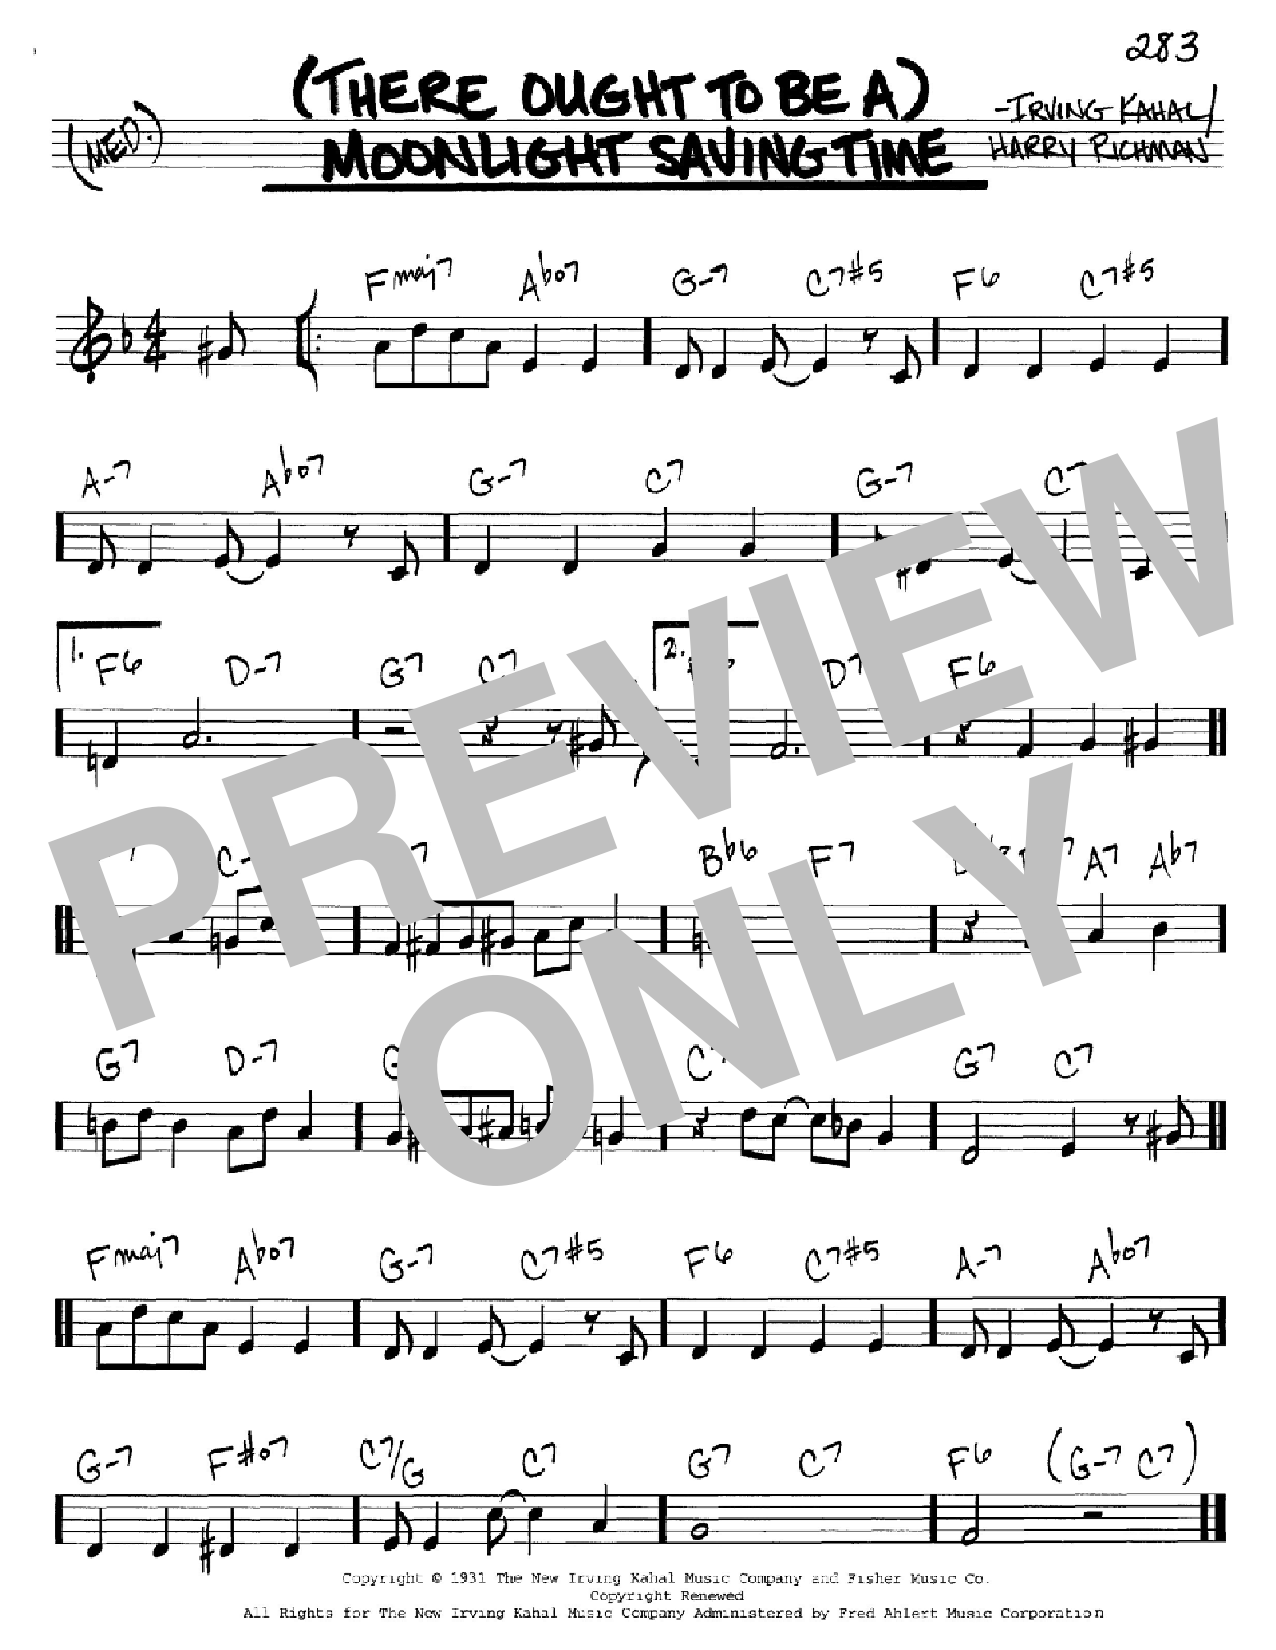 Download Irving Kahal (There Ought To Be A) Moonlight Savings Sheet Music